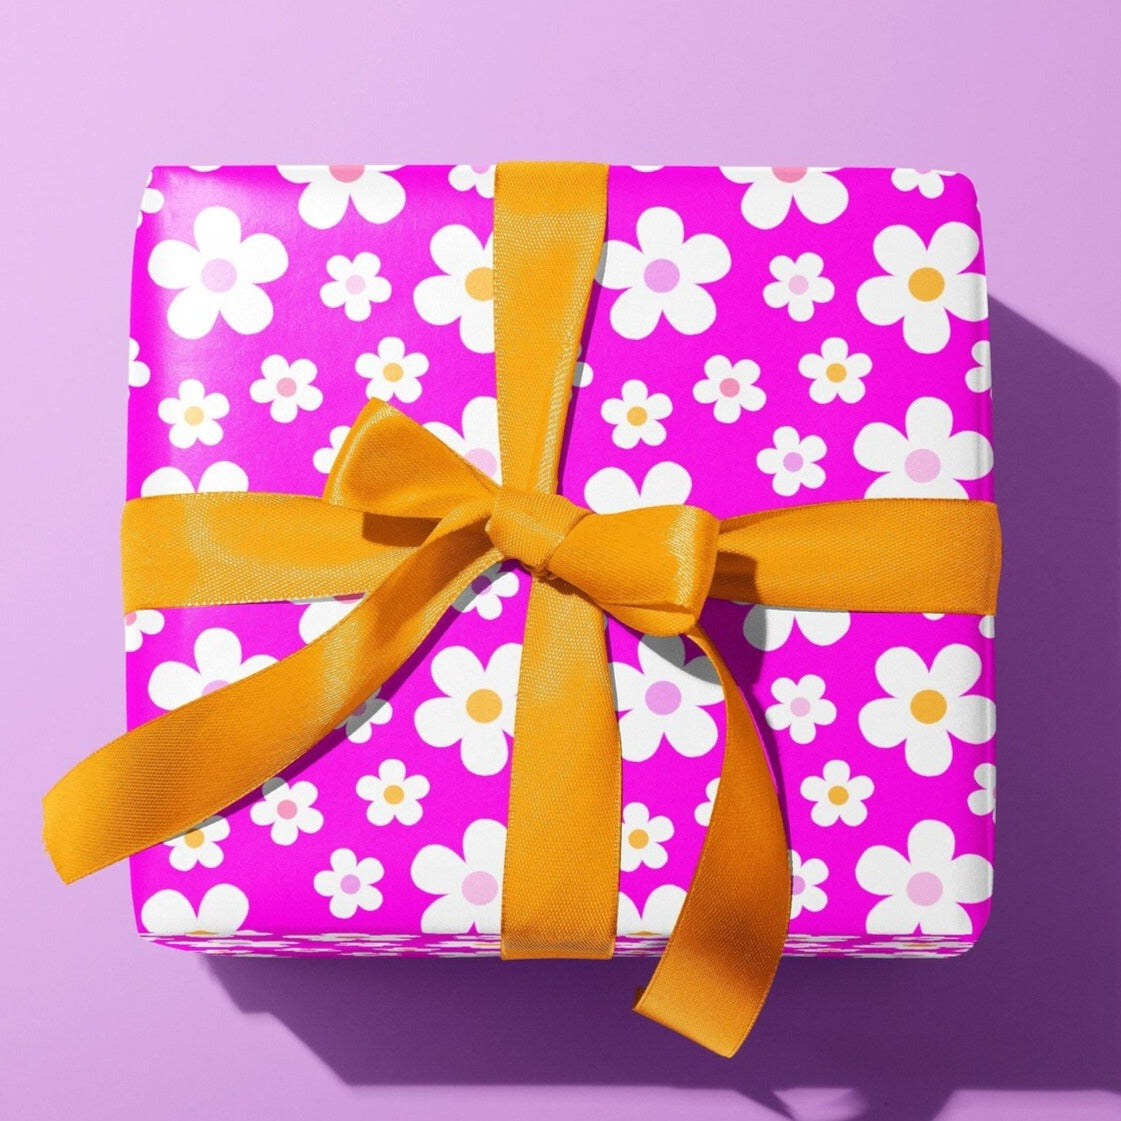 Sprinkle Club - A gift wrapped in bright hot pink wrapping paper with a cute daisy pattern